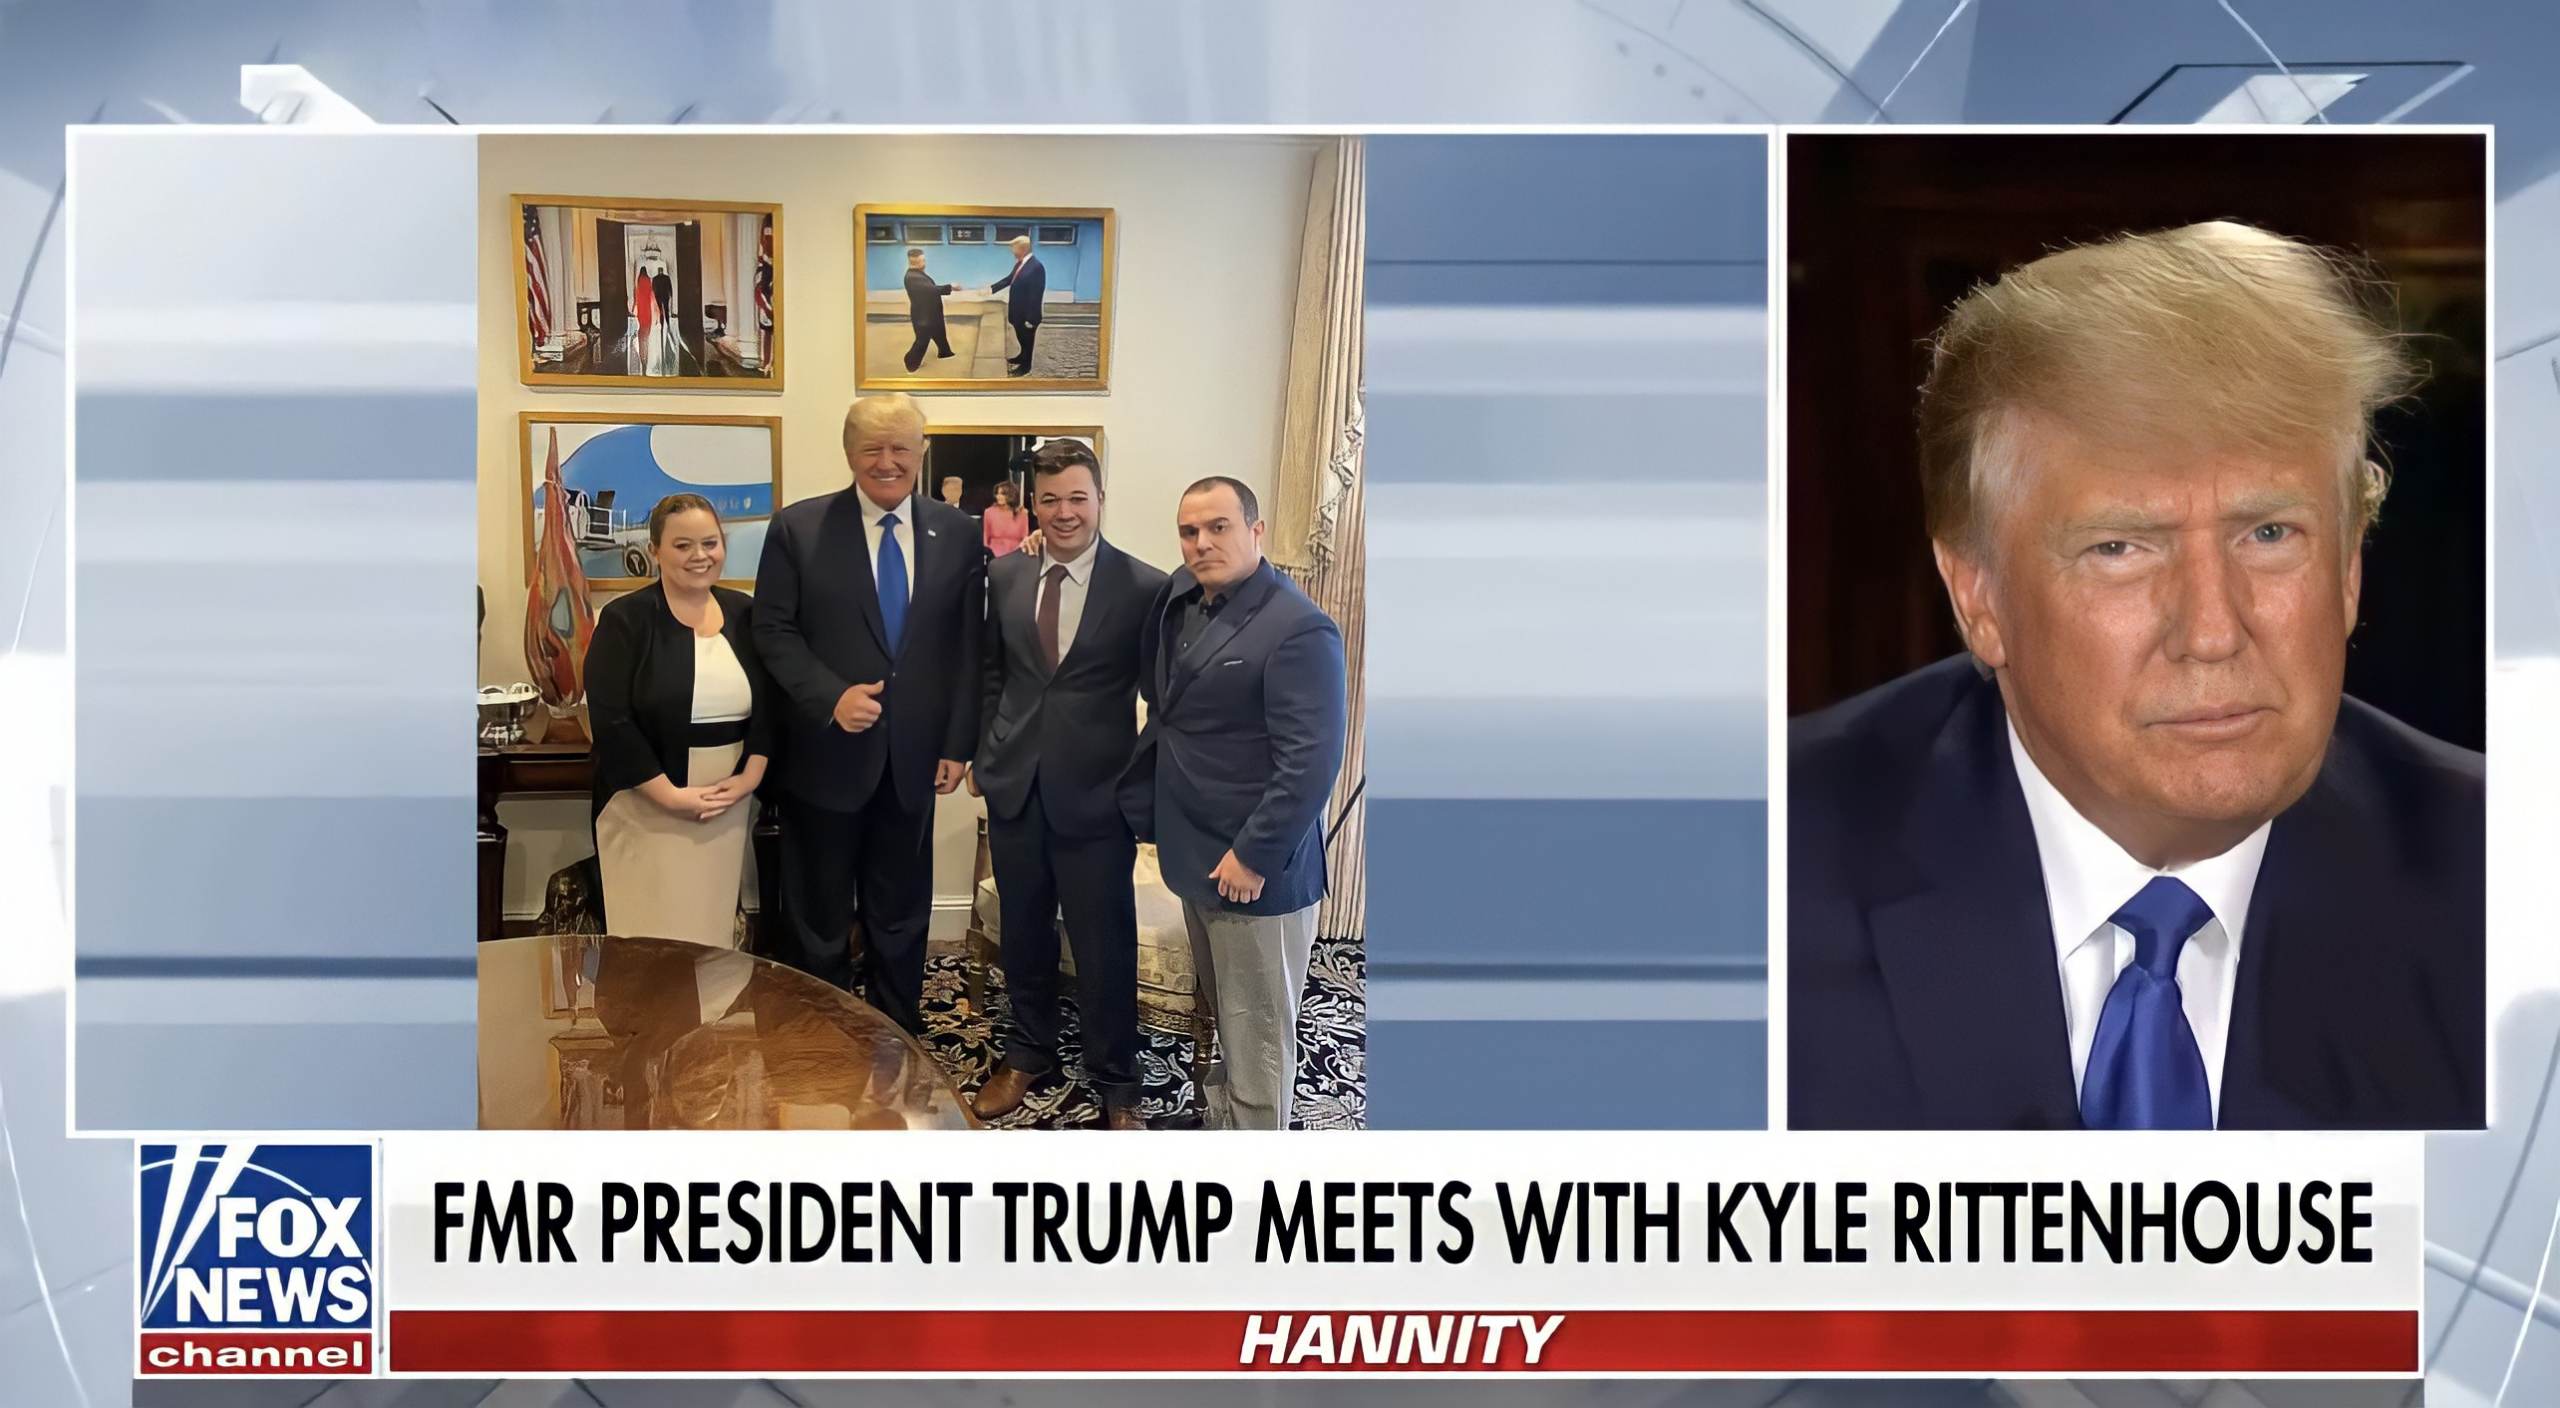  Kyle Rittenhouse and His Mother Flew Out to Meet with President Trump in Mar-a-Lago (Video)